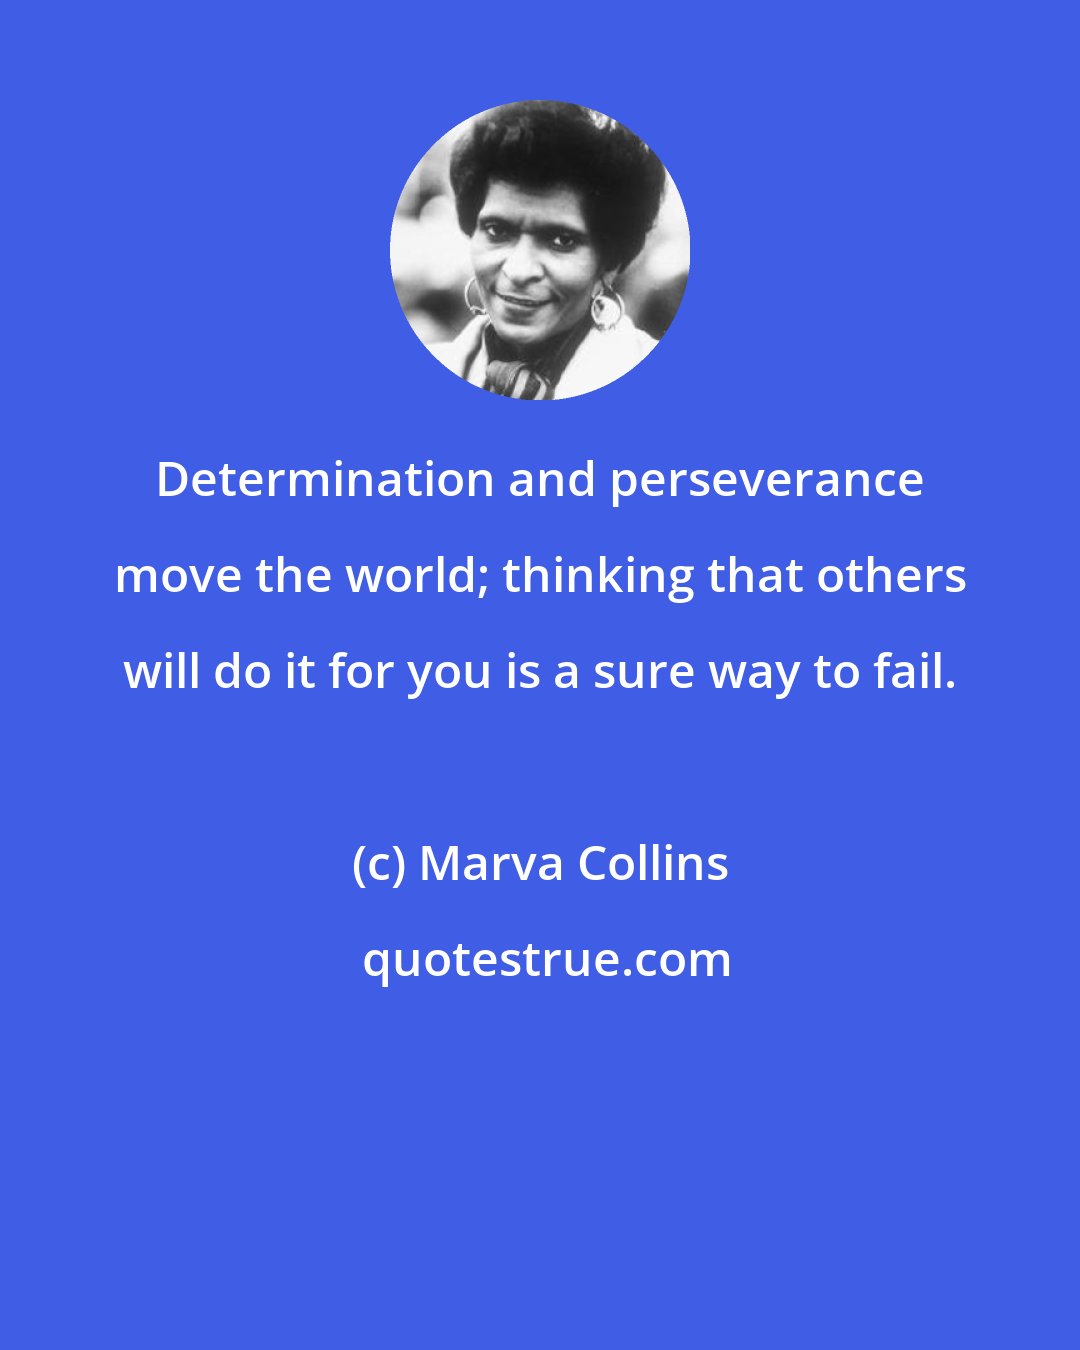 Marva Collins: Determination and perseverance move the world; thinking that others will do it for you is a sure way to fail.